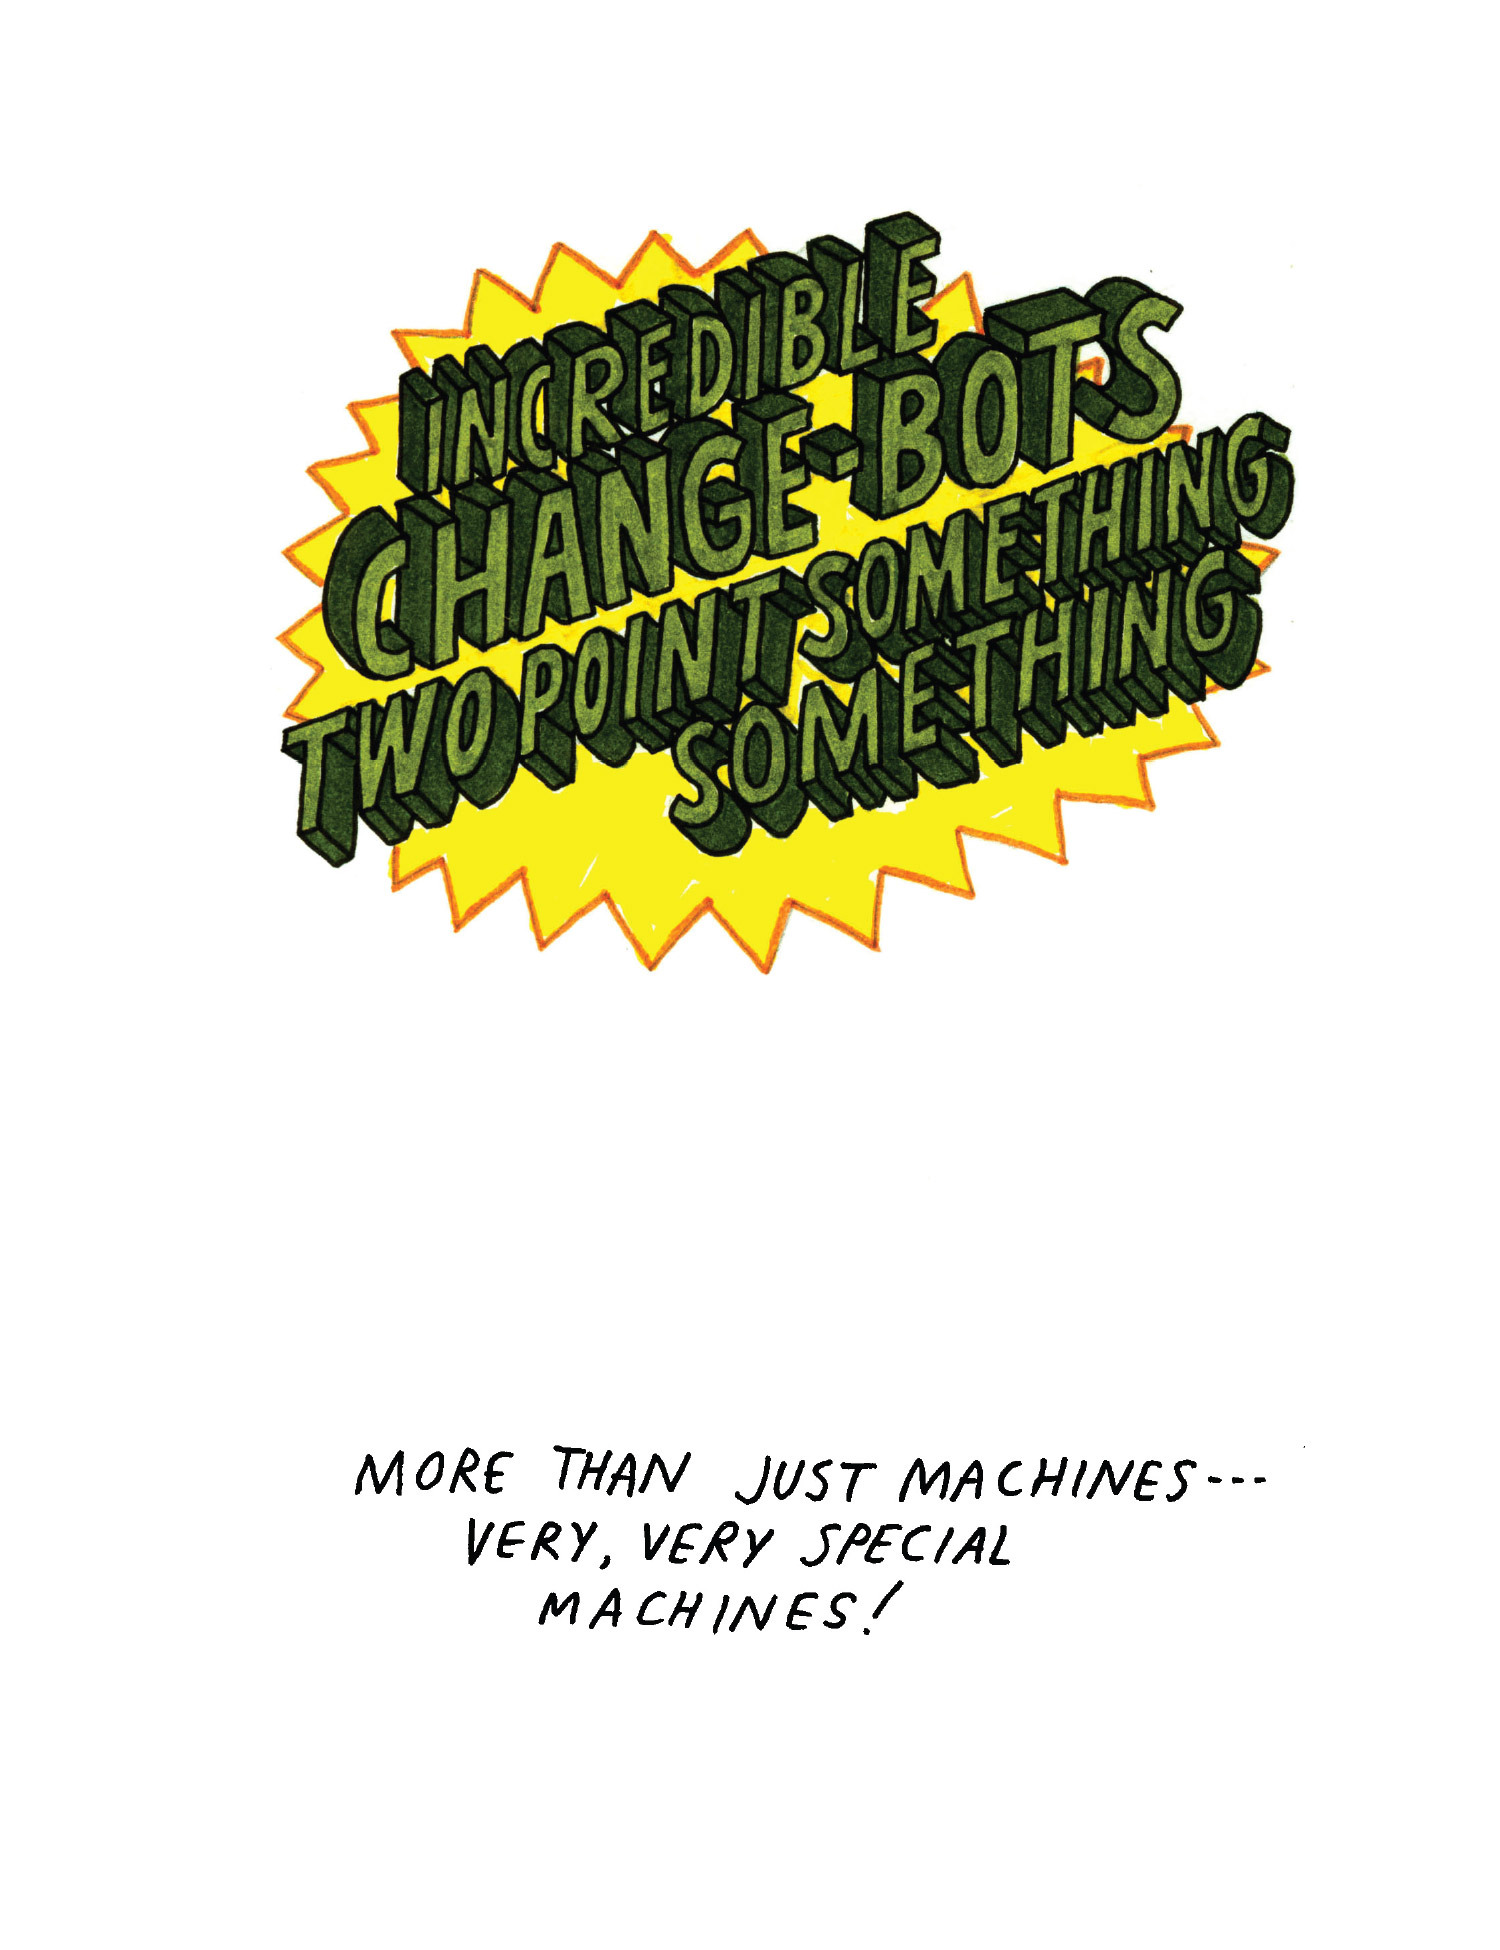 Read online Incredible Change-Bots: Two Point Something Something comic -  Issue # TPB (Part 1) - 2